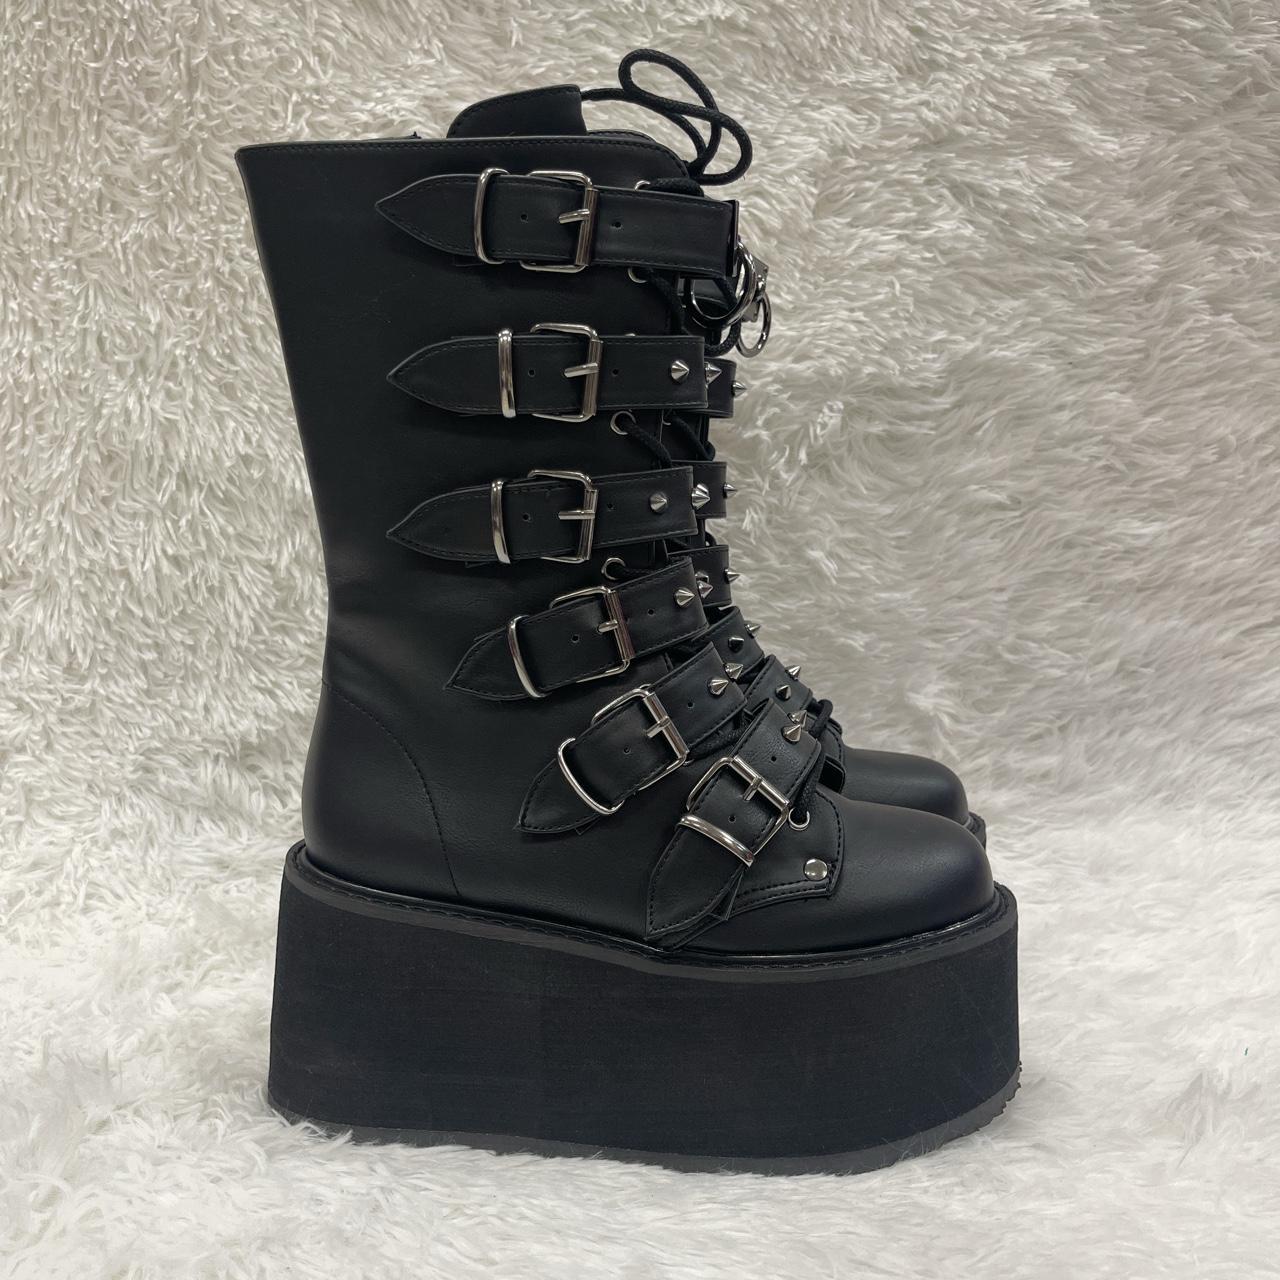 Demonia Damned-225 Black Vegan Leather with a 3 1/2